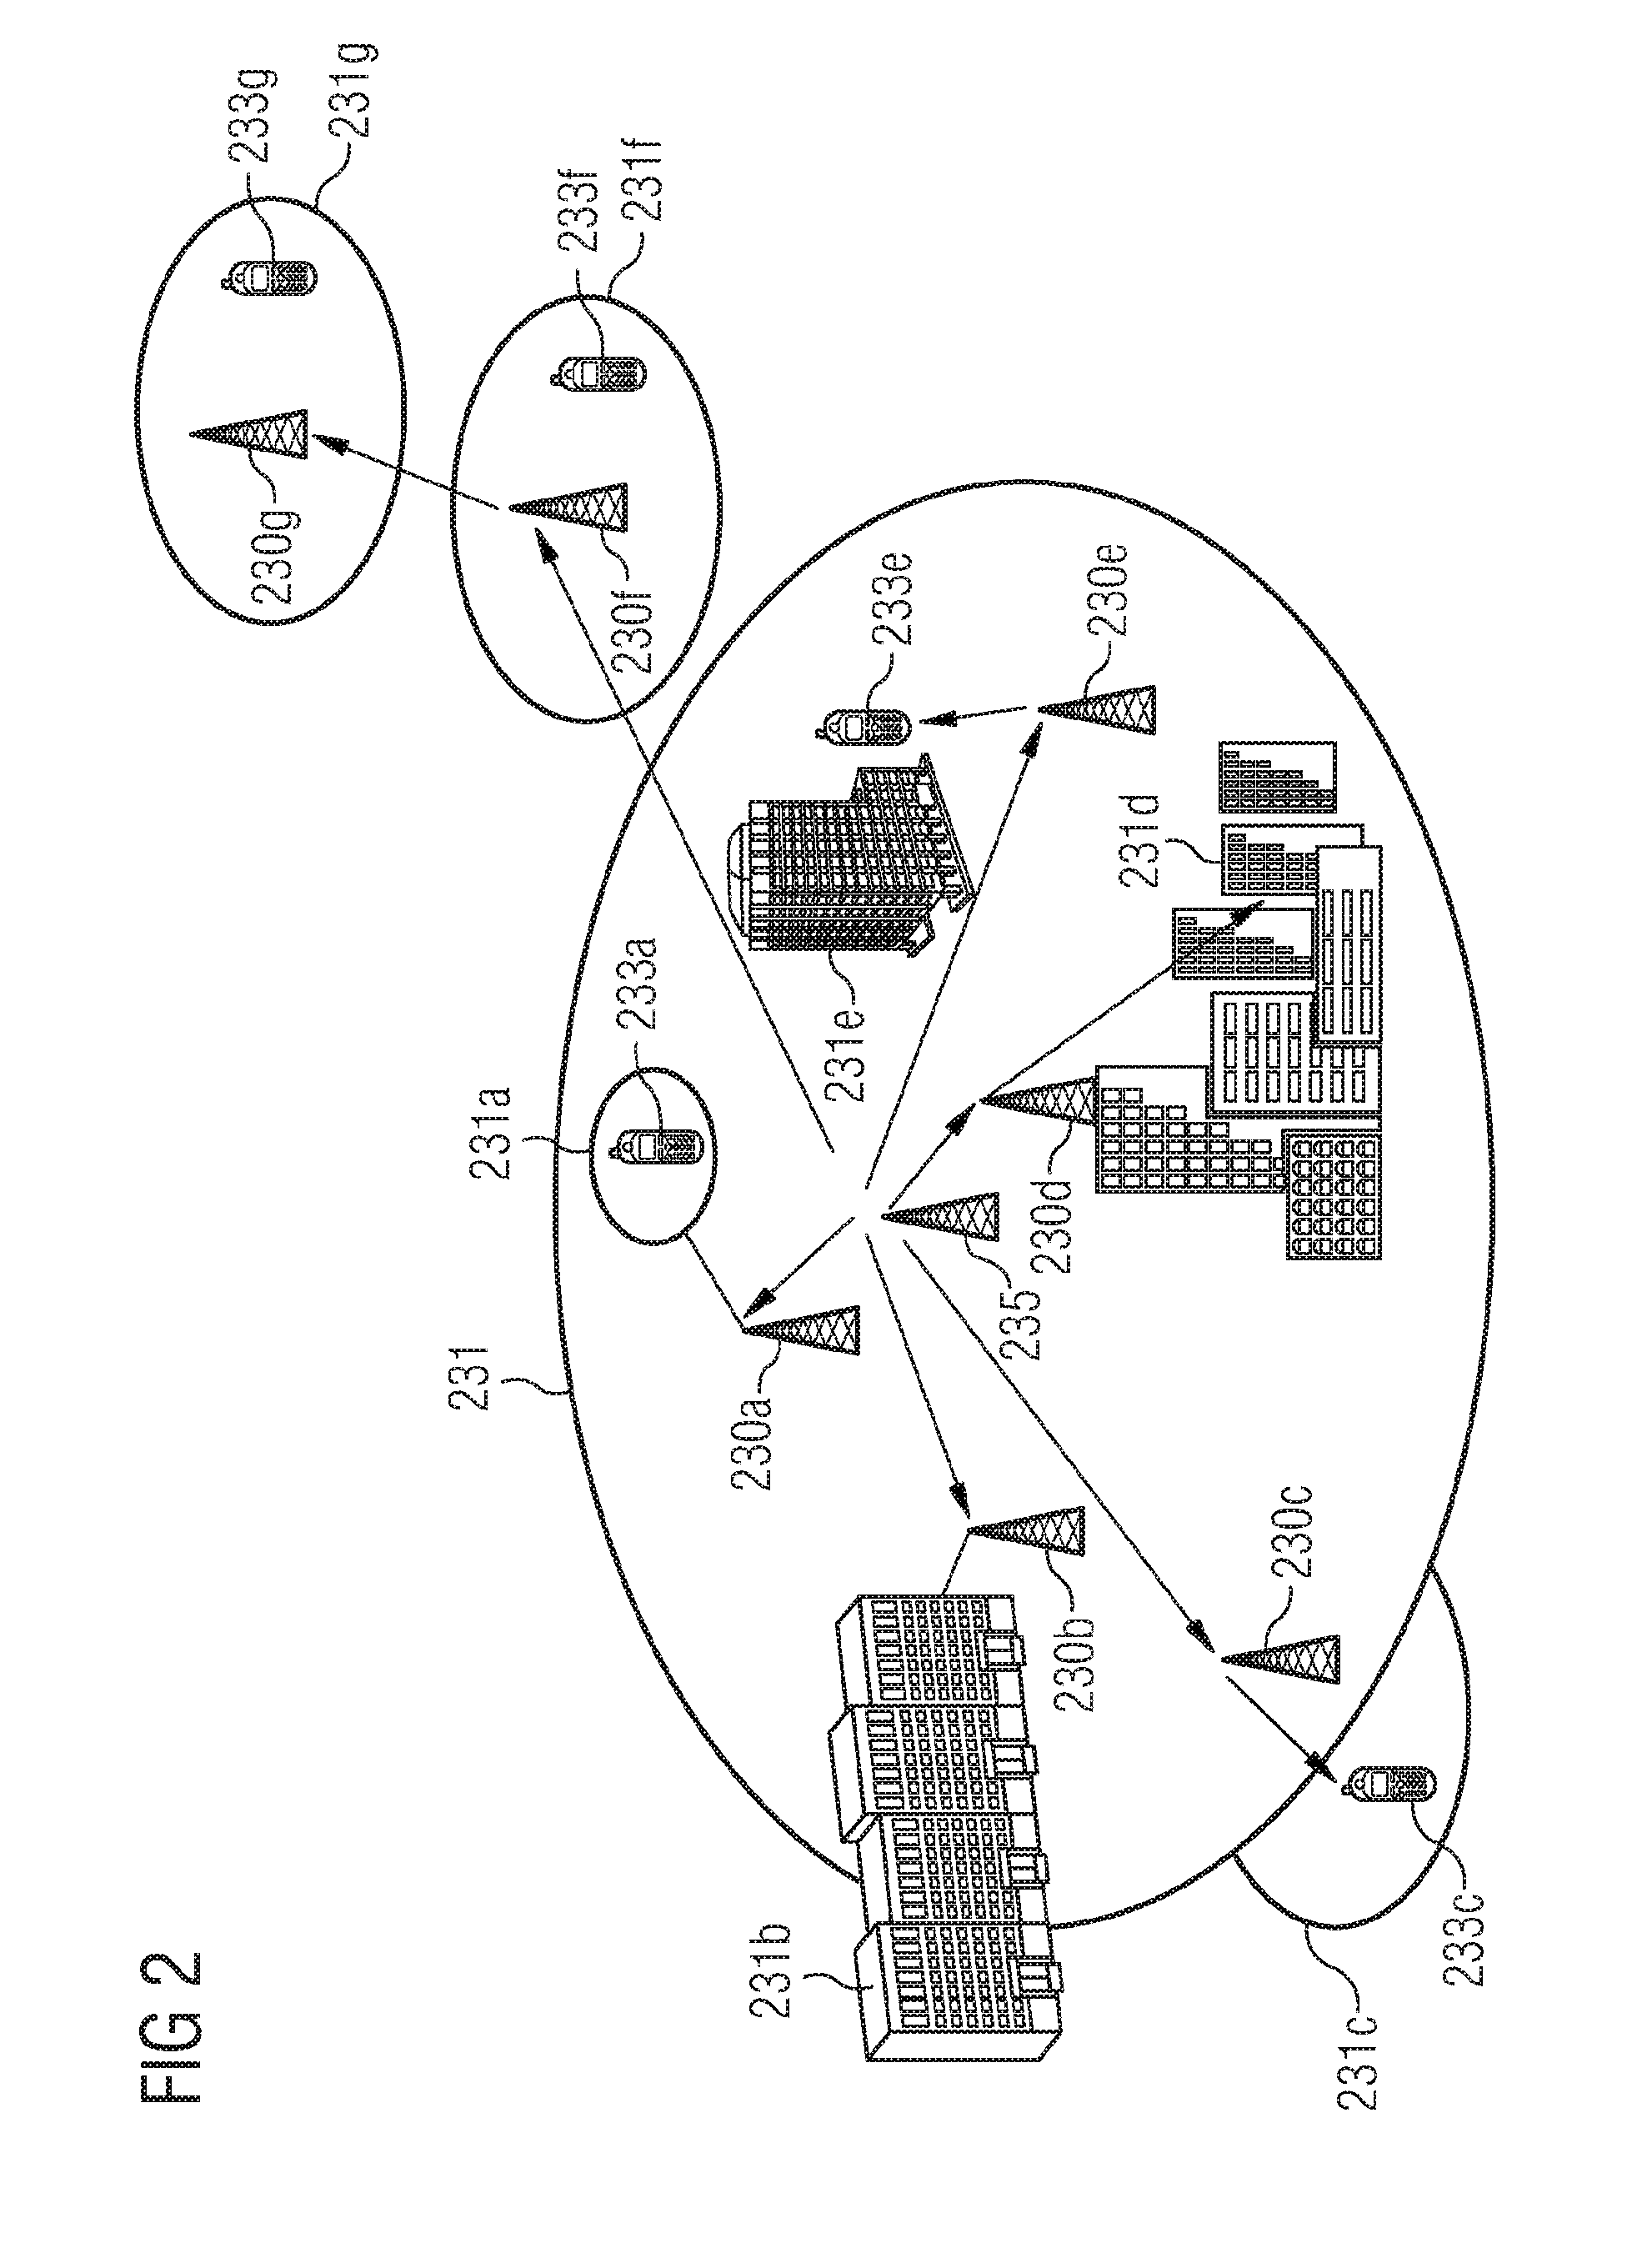 Network comprising a privately owned base station coupled with a publicly available network element